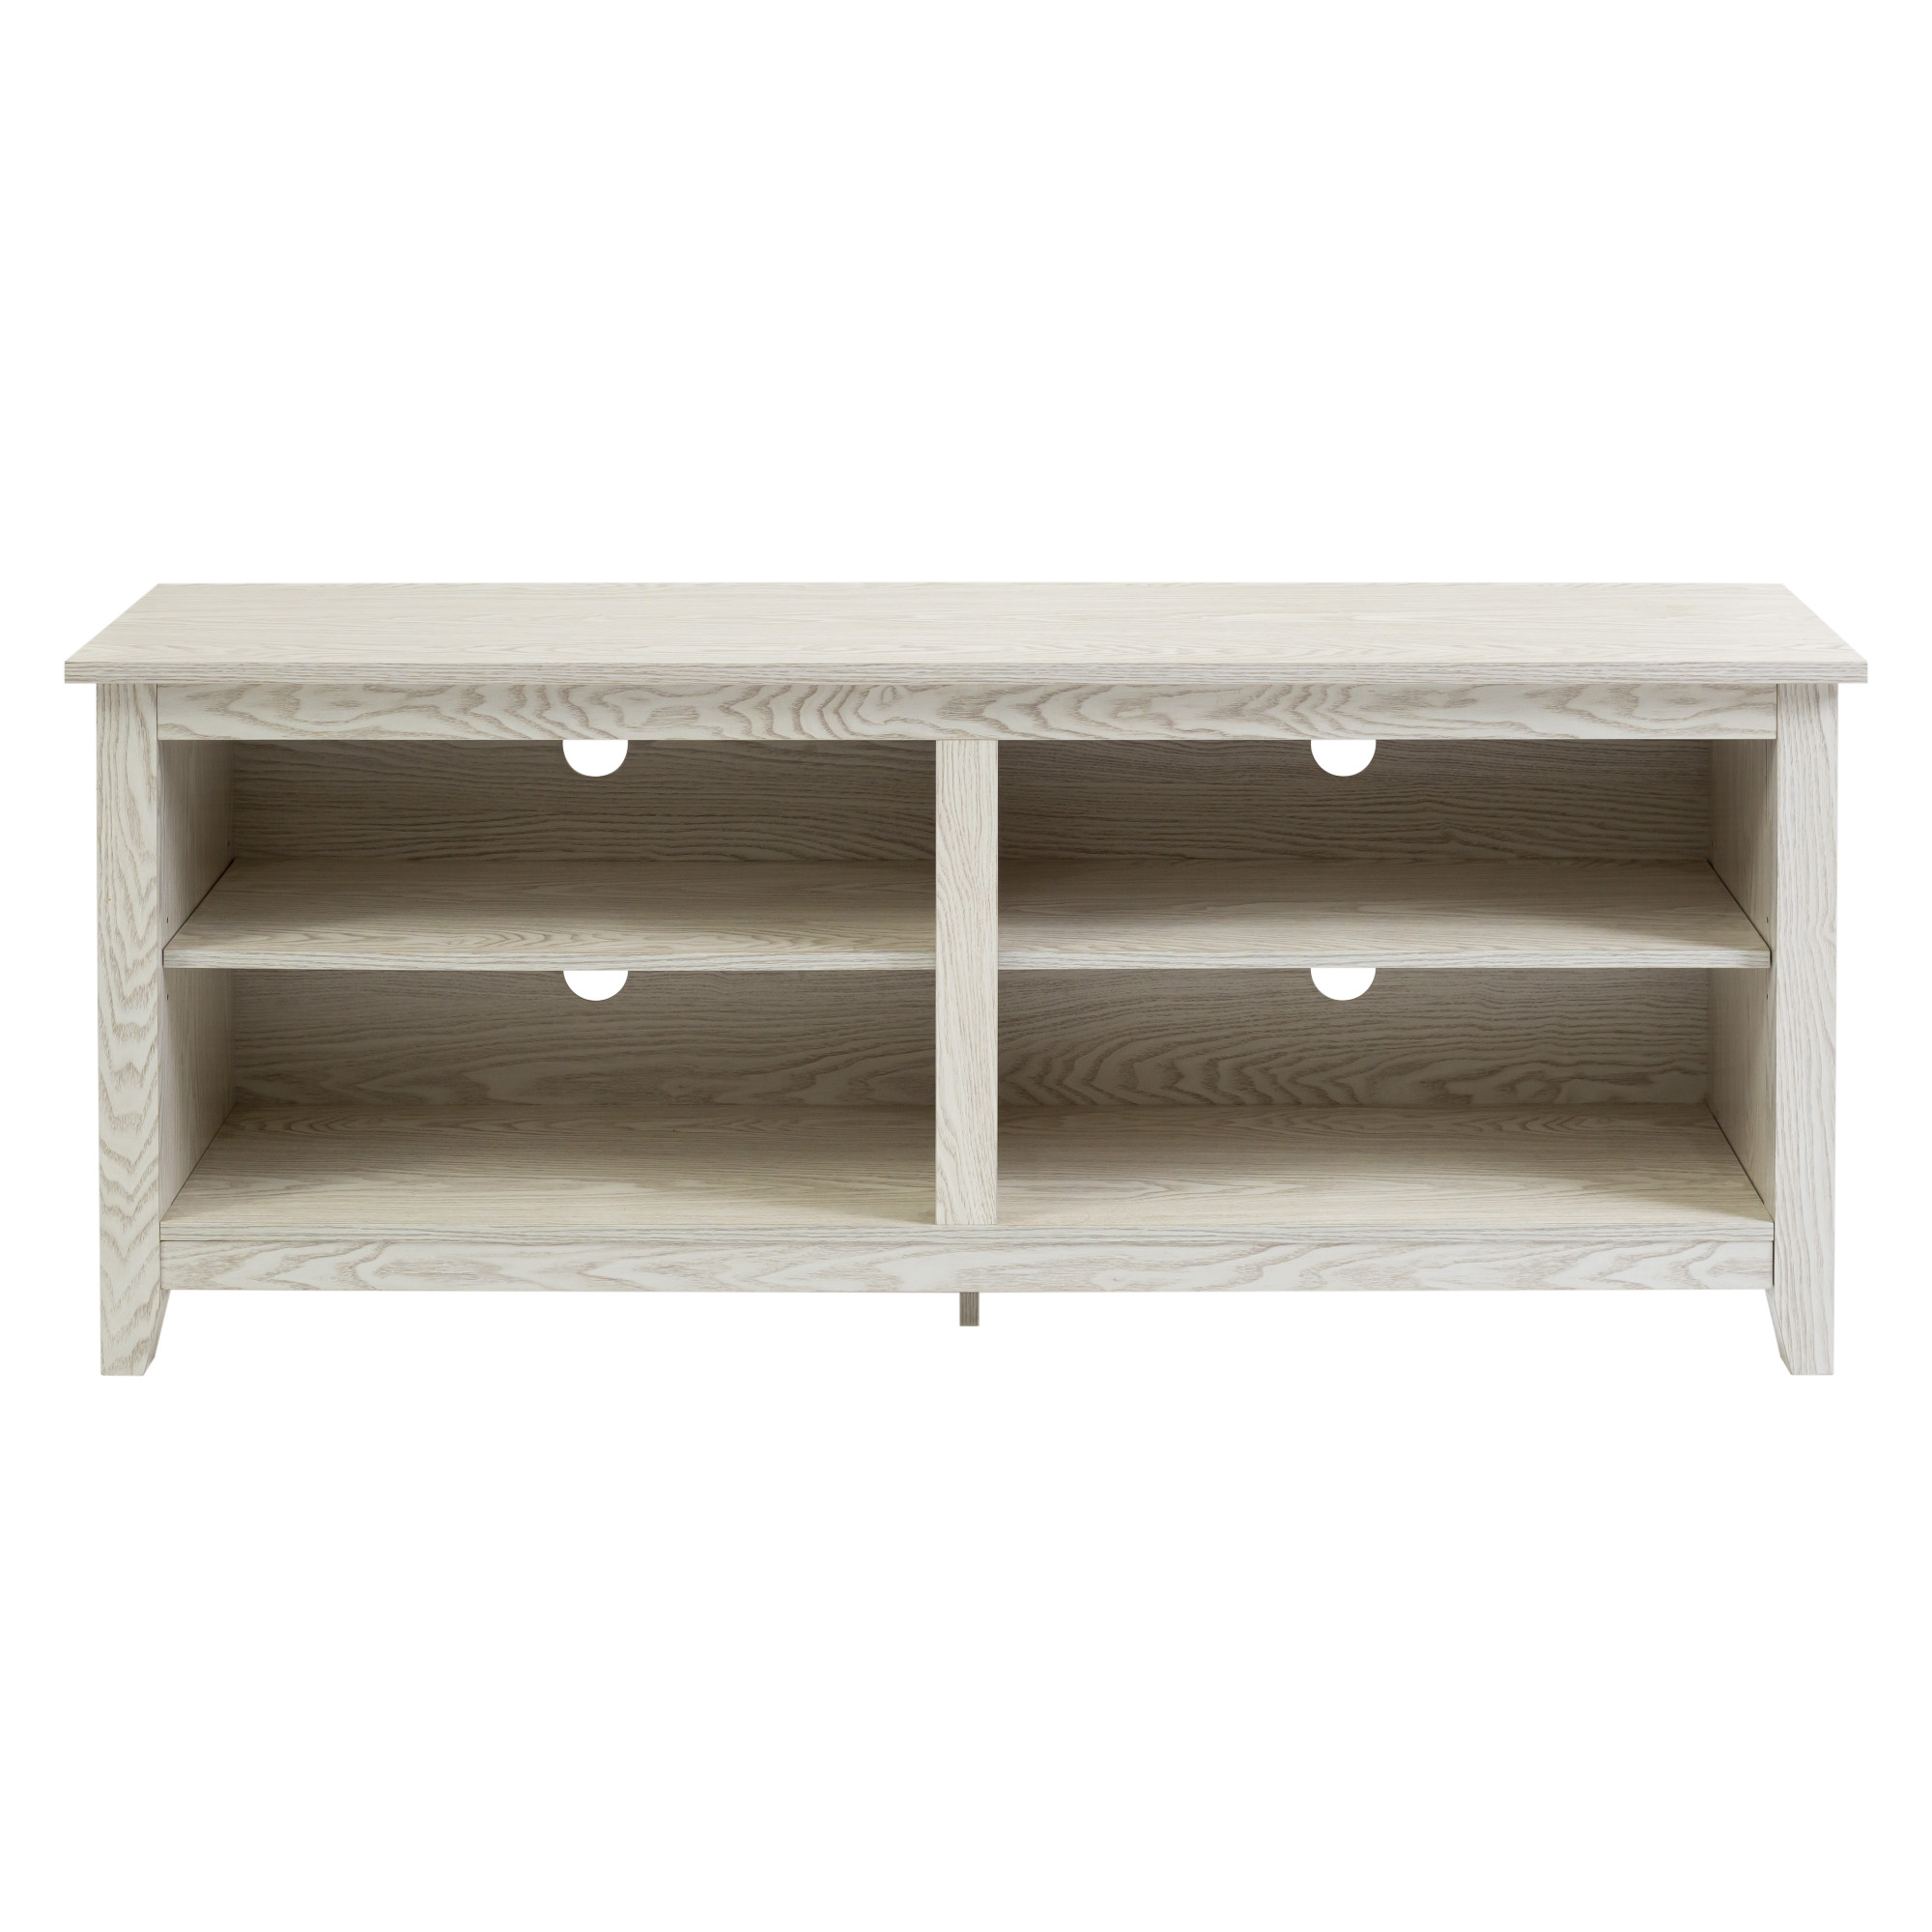 Manor Park Open Storage TV Stand for TVs up to 65", White Wash - image 2 of 11